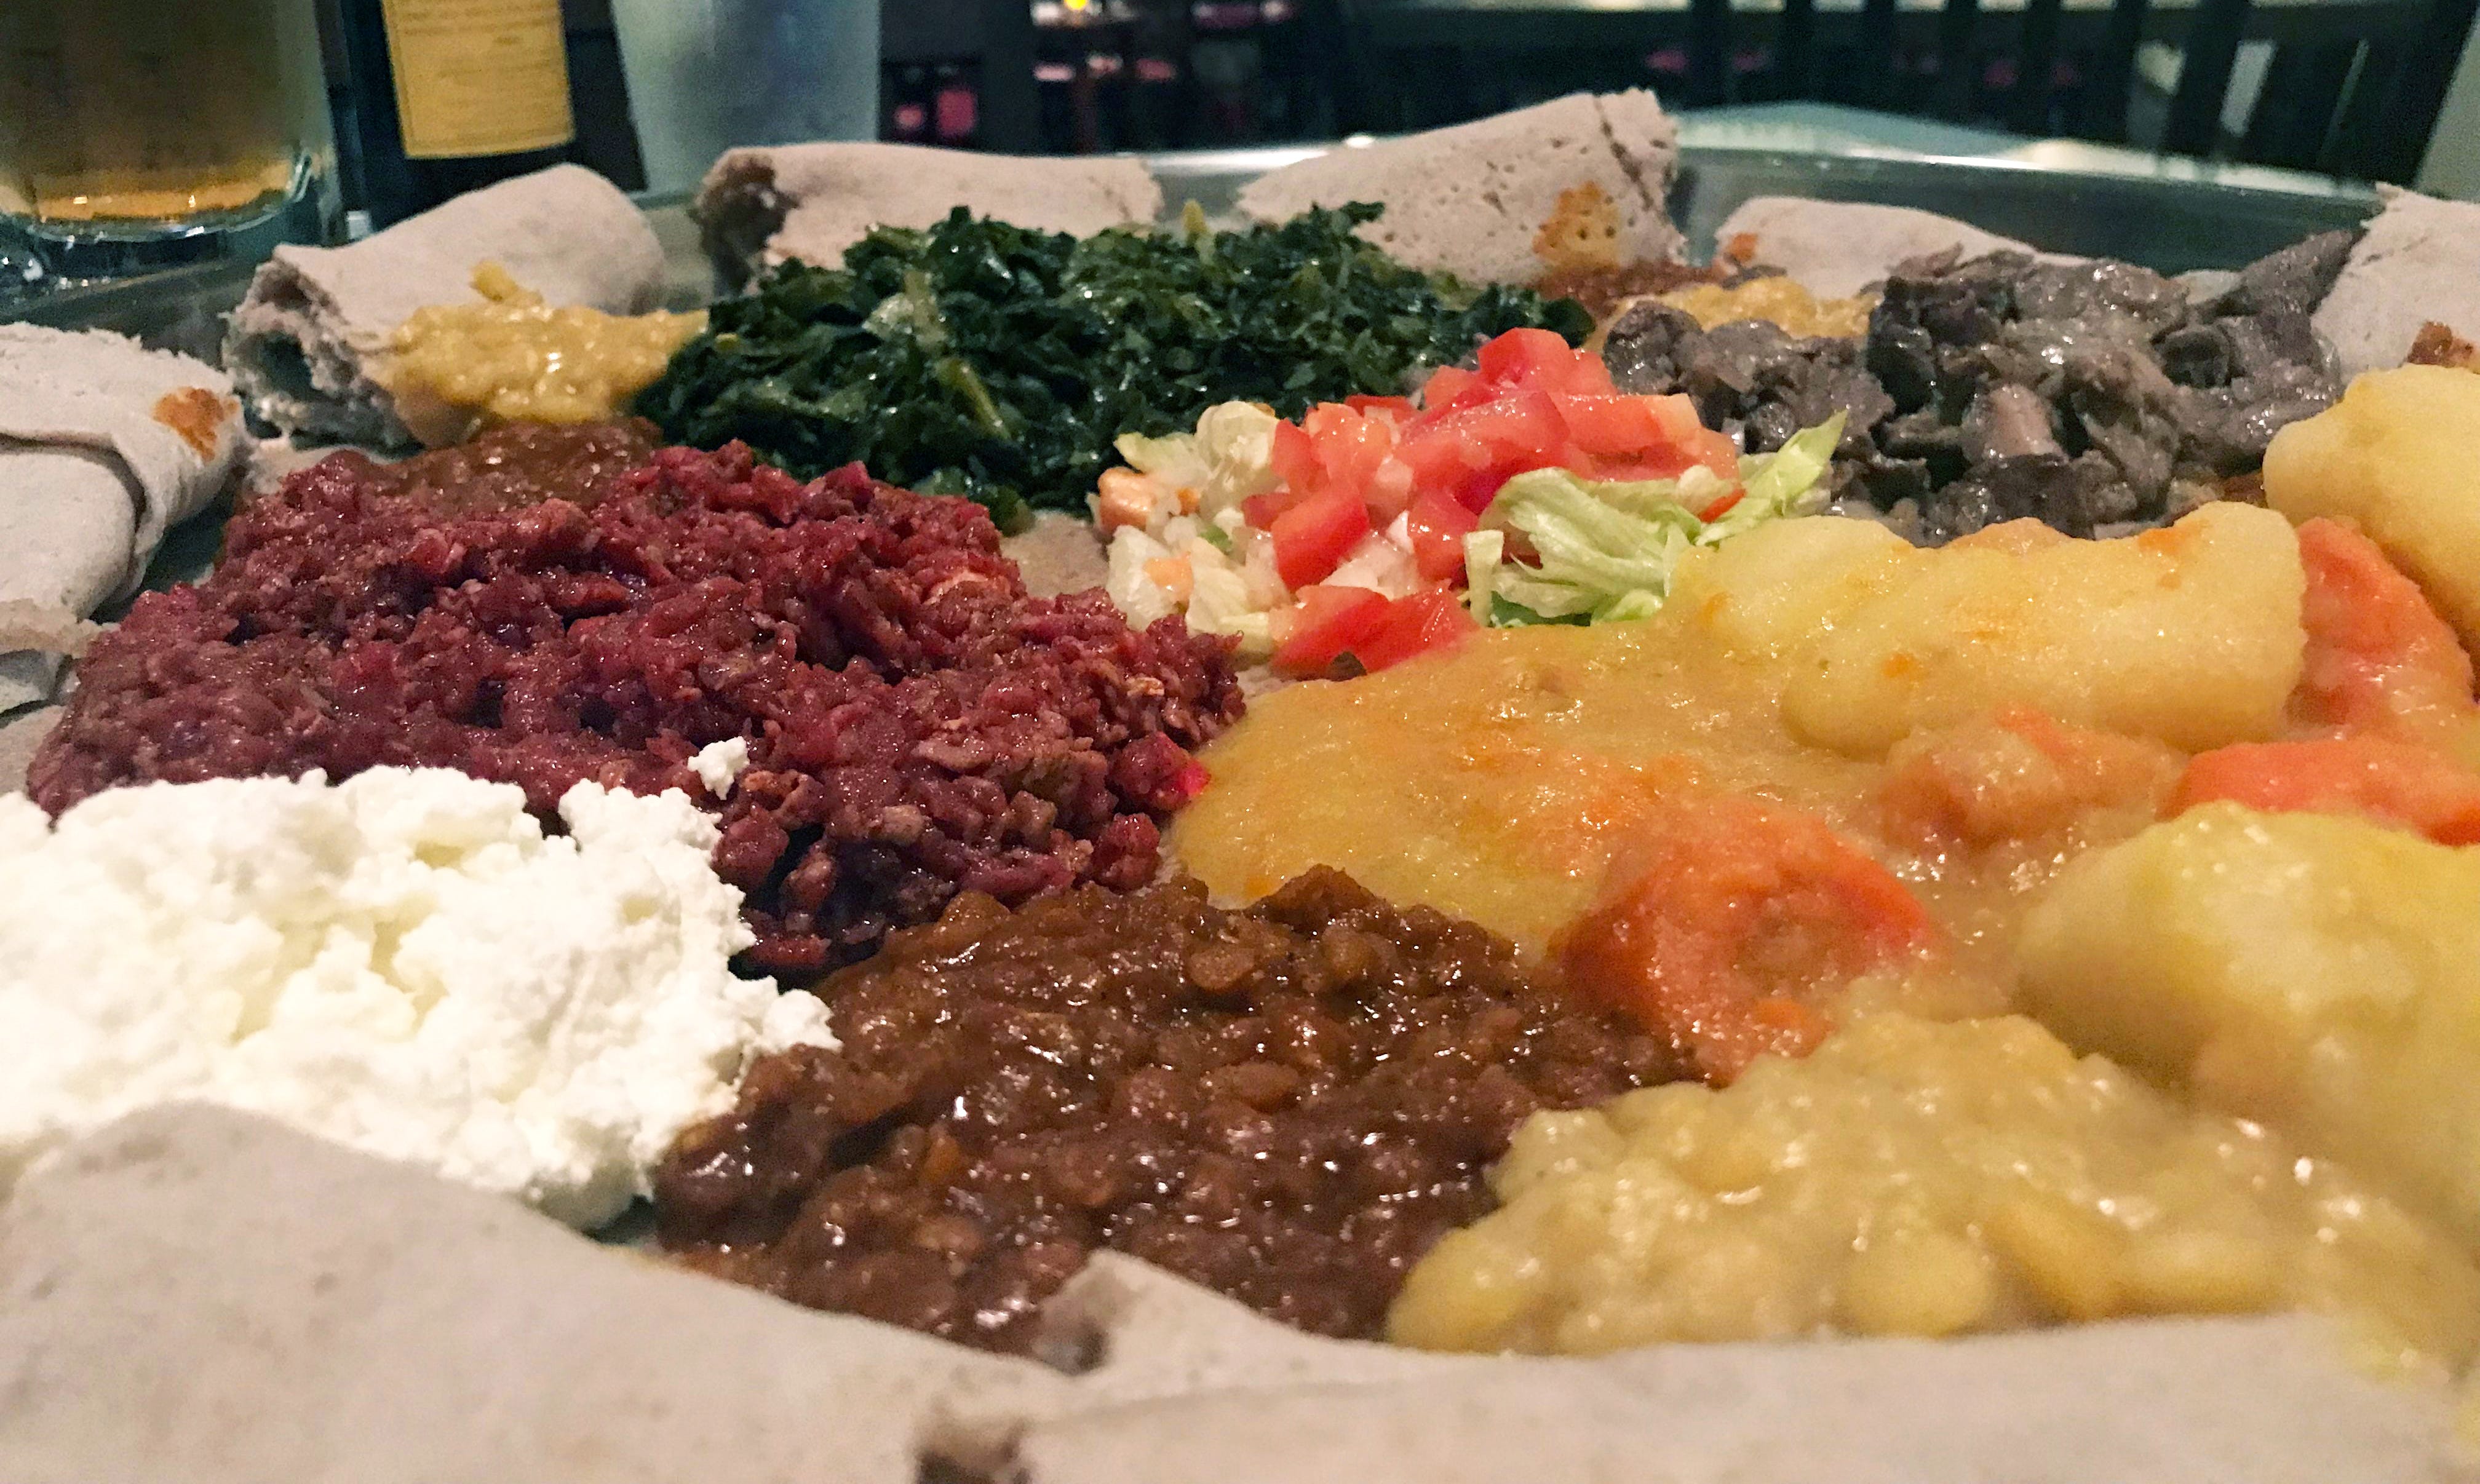 Stews and sautés are served on injera, a sourdough flatbread, at Ethiopian Cottage, 1824 N. Farwell Ave. The menu has many meat and meatless options.